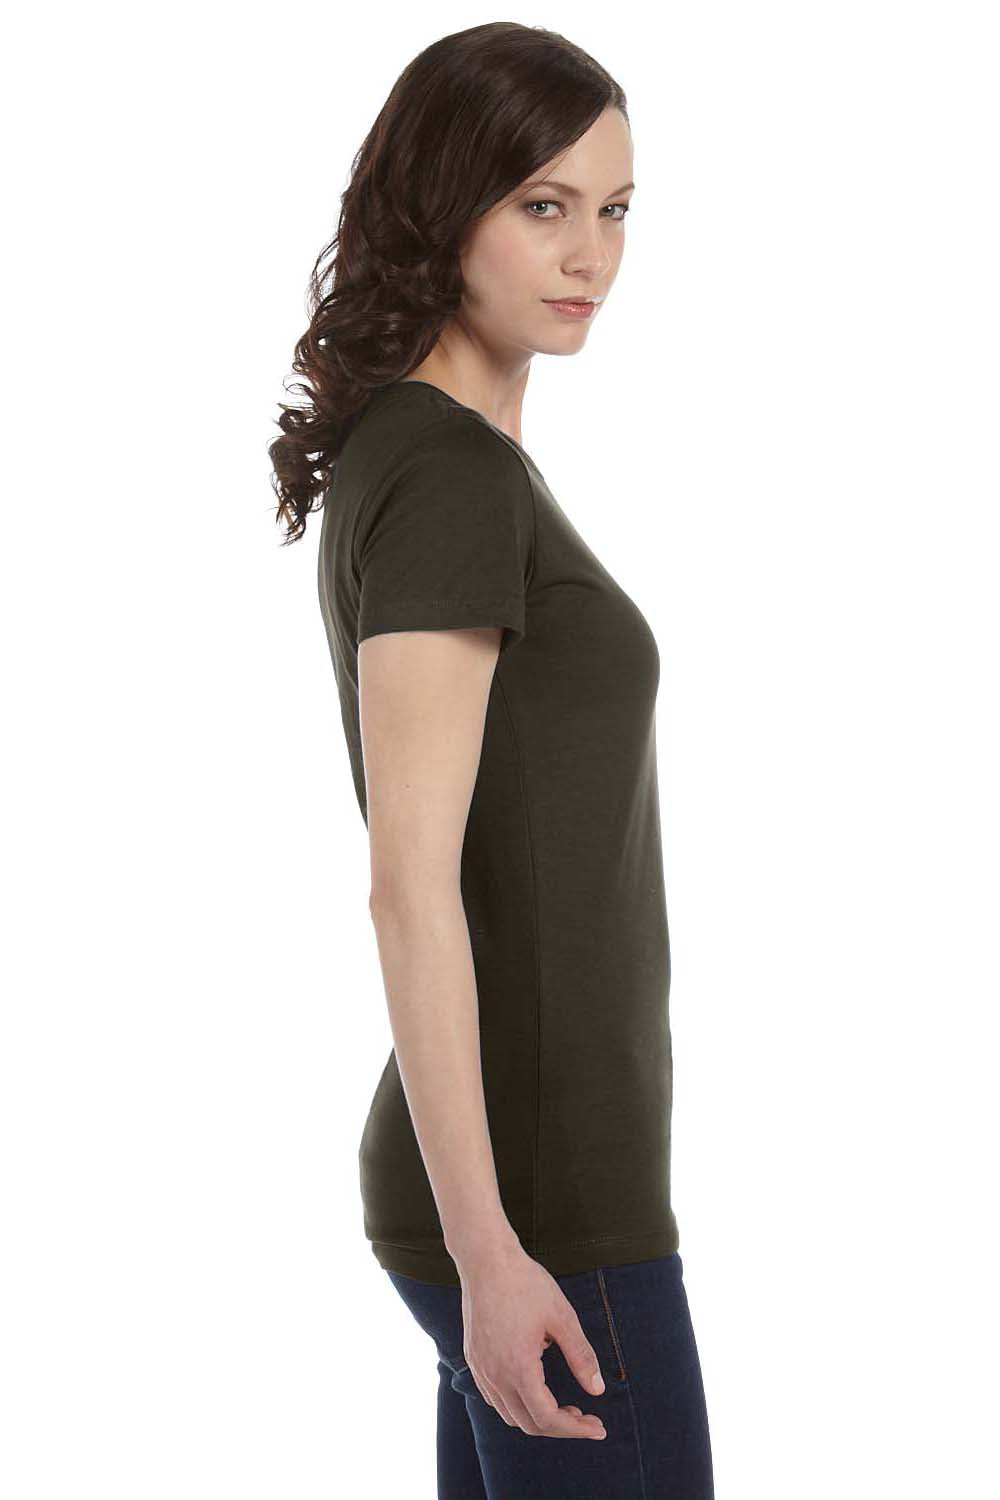 Bella + Canvas 6004 Womens The Favorite Short Sleeve Crewneck T-Shirt Army Green Side